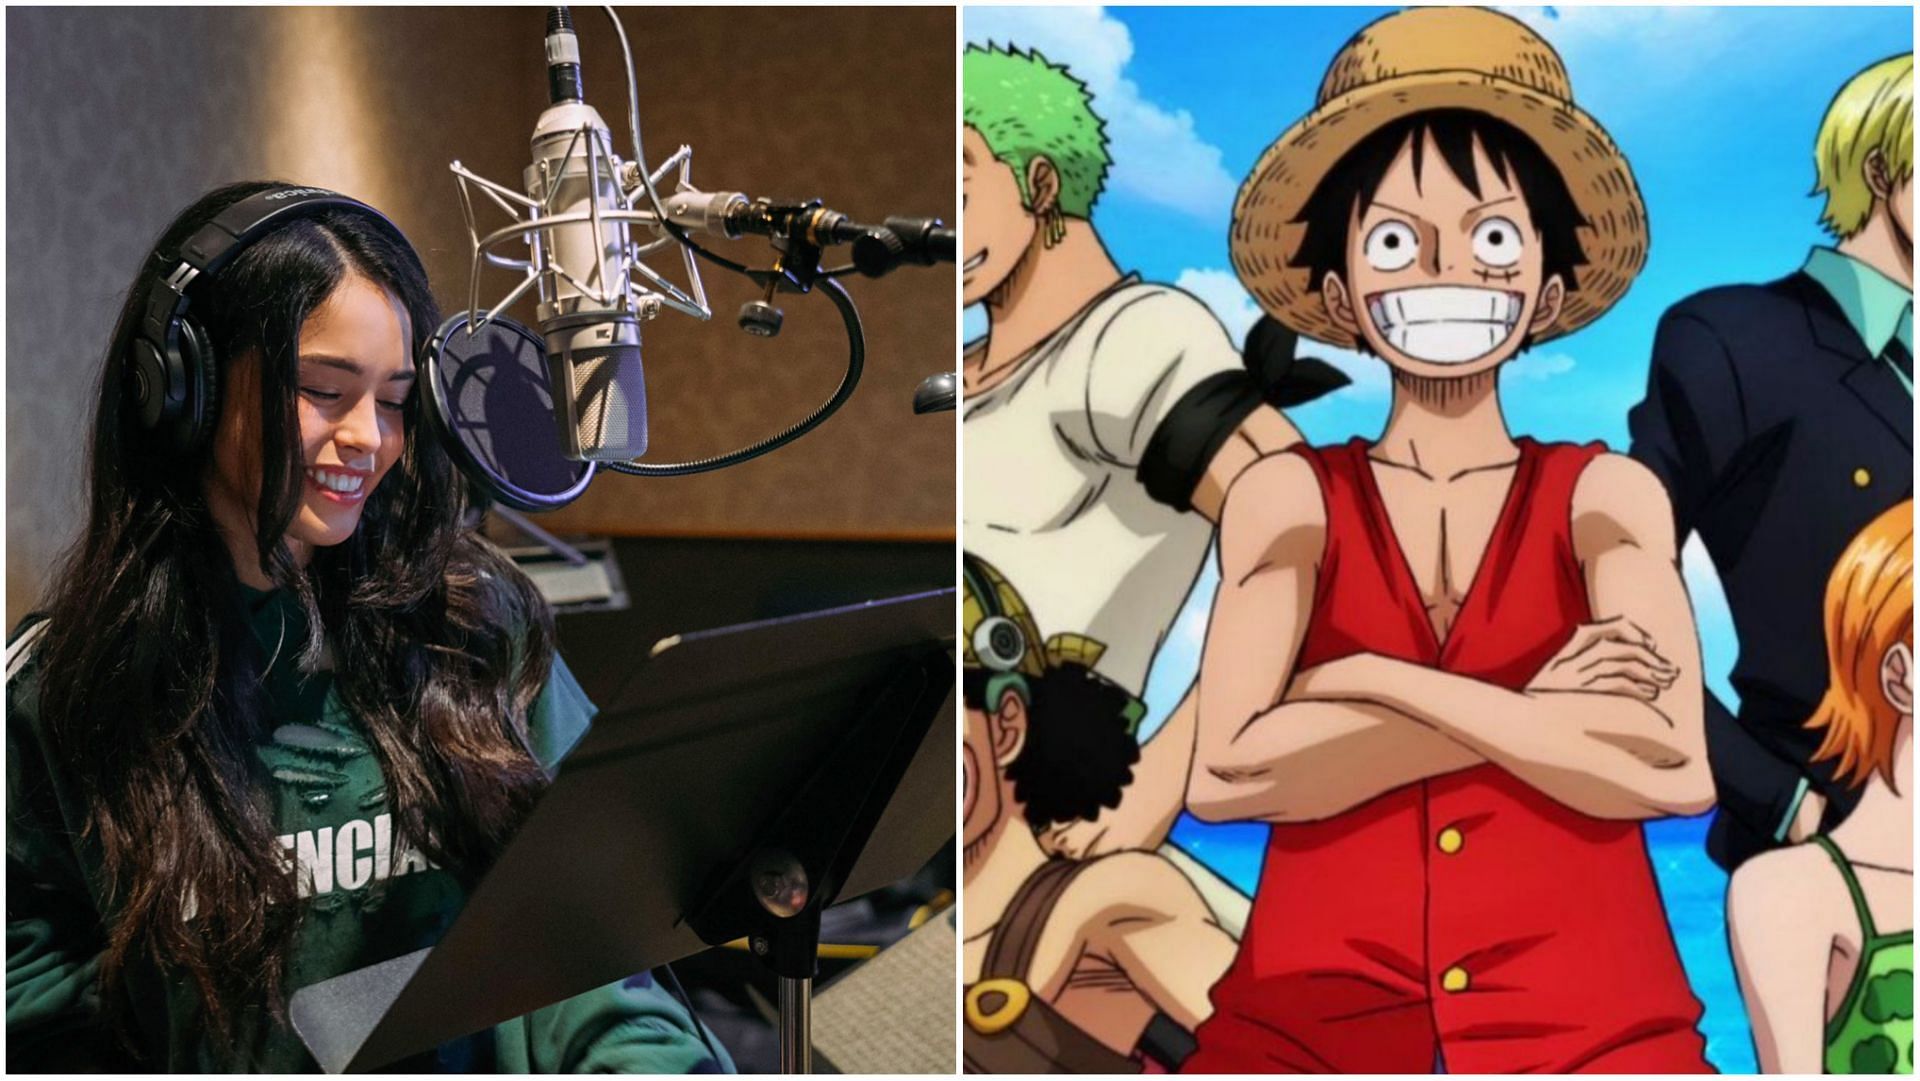 Valkyrae proclaimed her love for the long-running anime series One Piece on Twitter (Image via Sportskeeda)